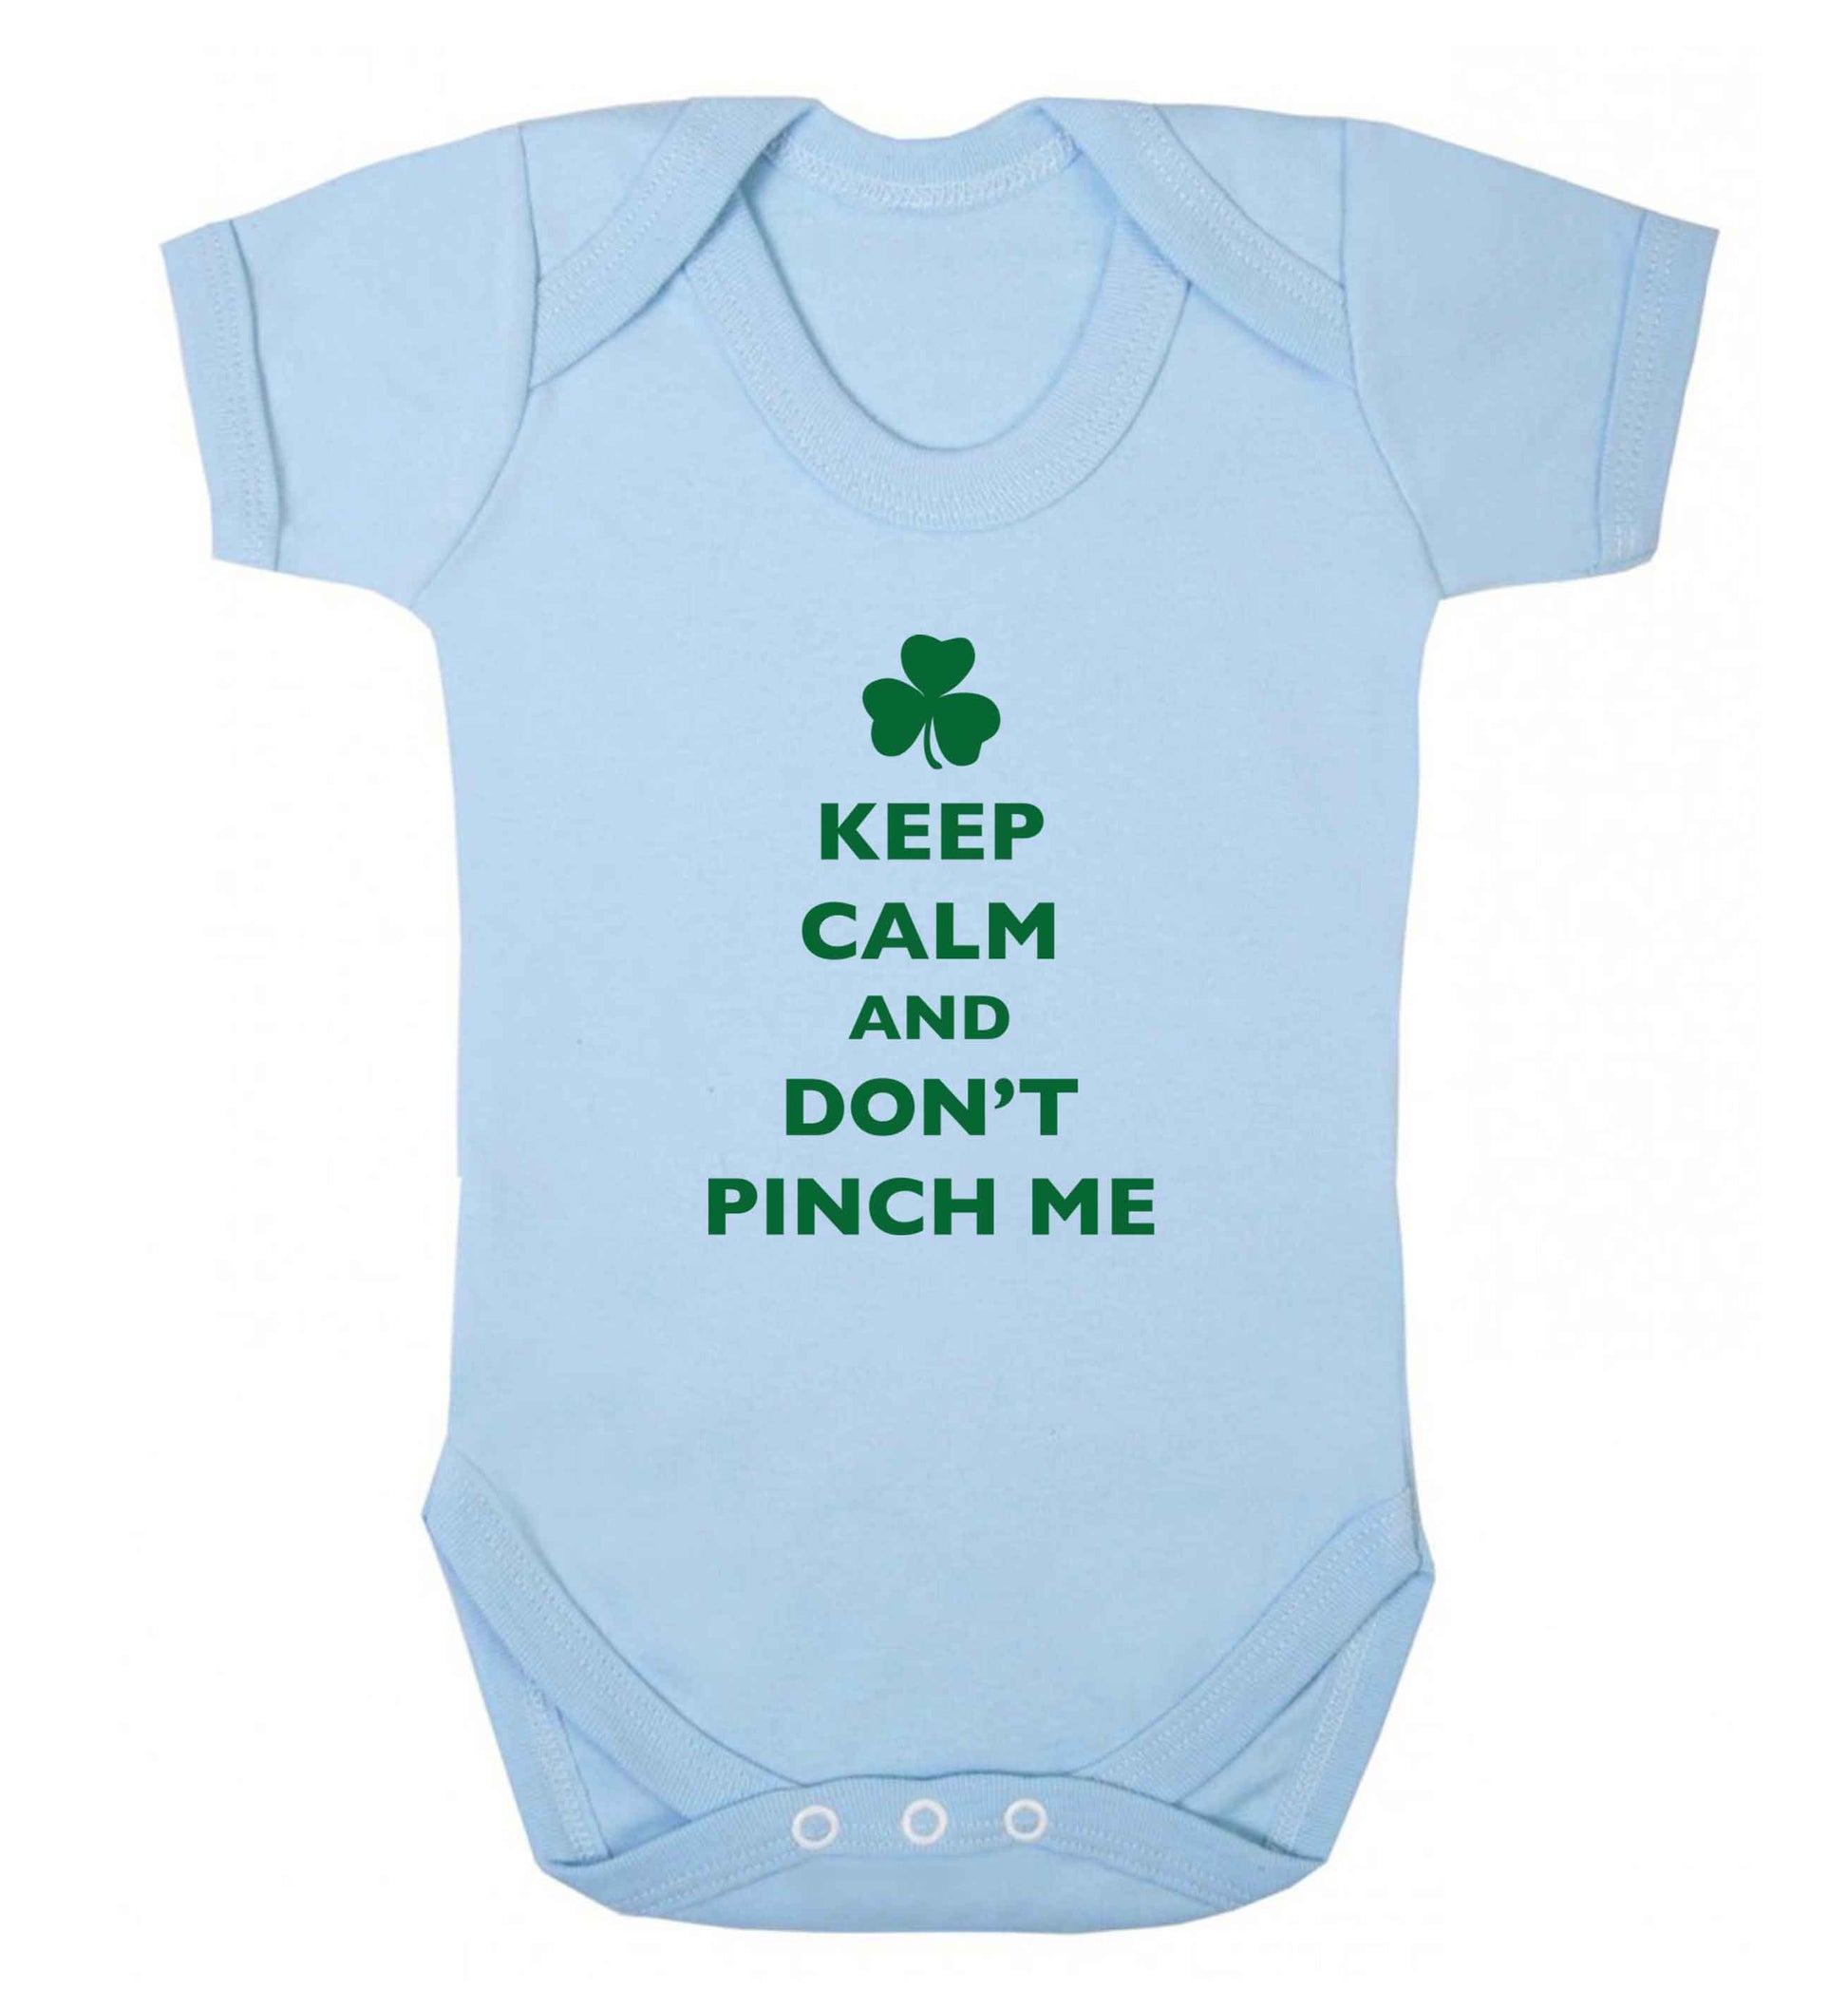 Keep calm and don't pinch me baby vest pale blue 18-24 months